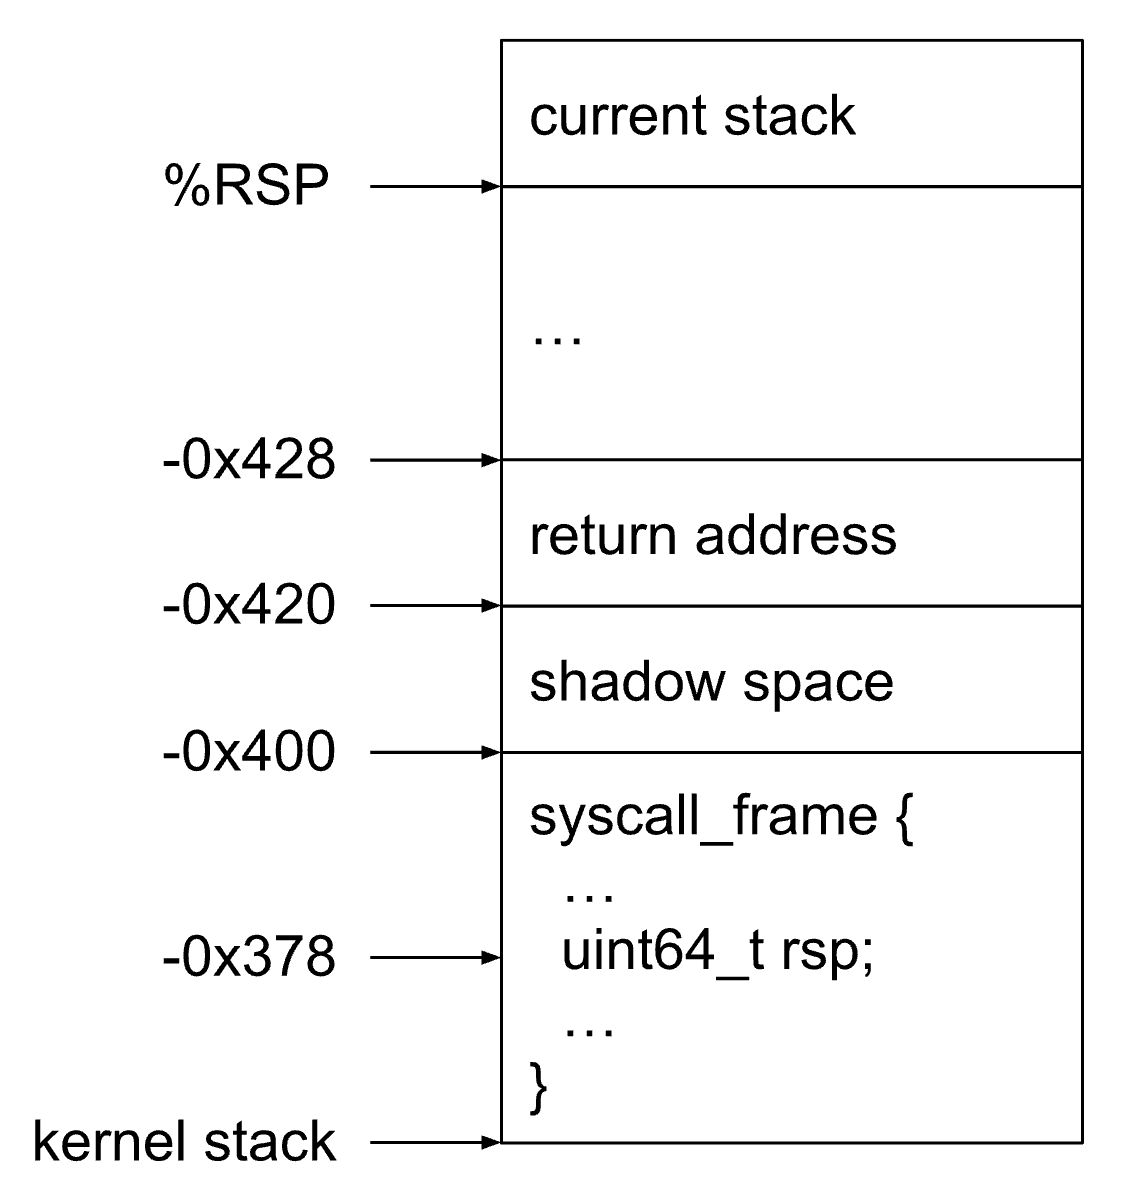 Stack layout